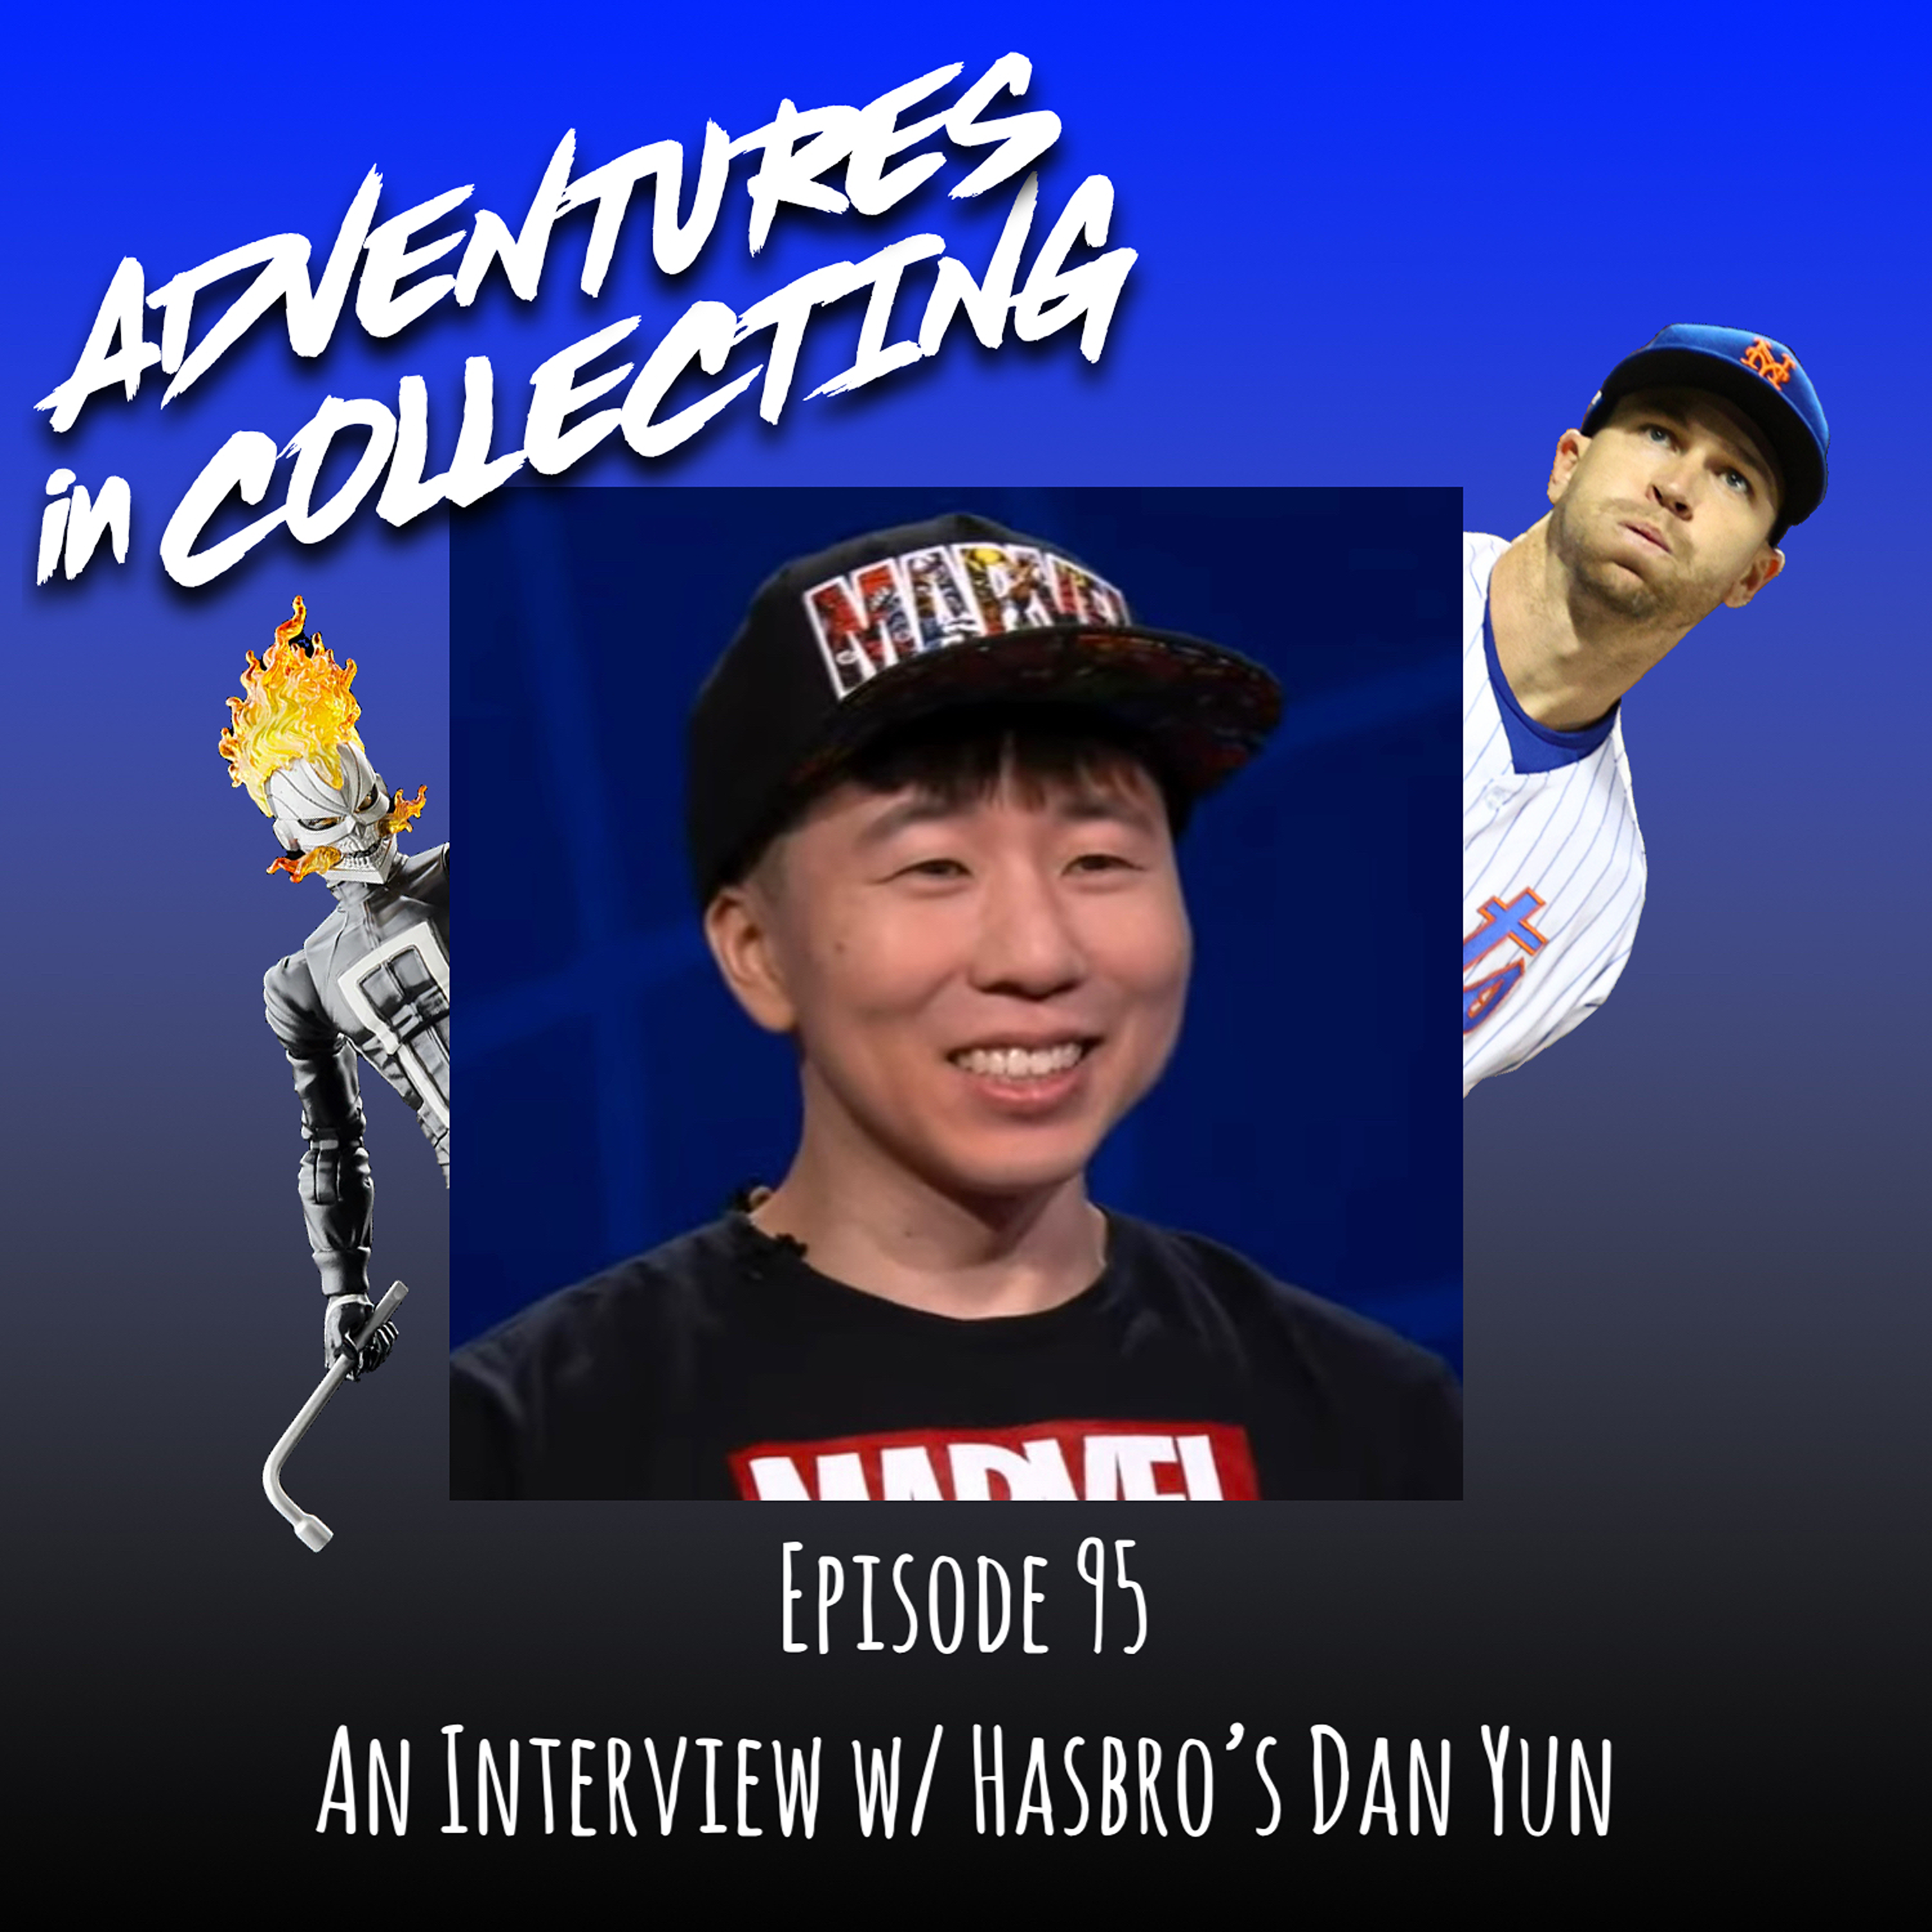 Marvel Legends, Sports, and Stories: An Interview with Hasbro’s Dan Yun